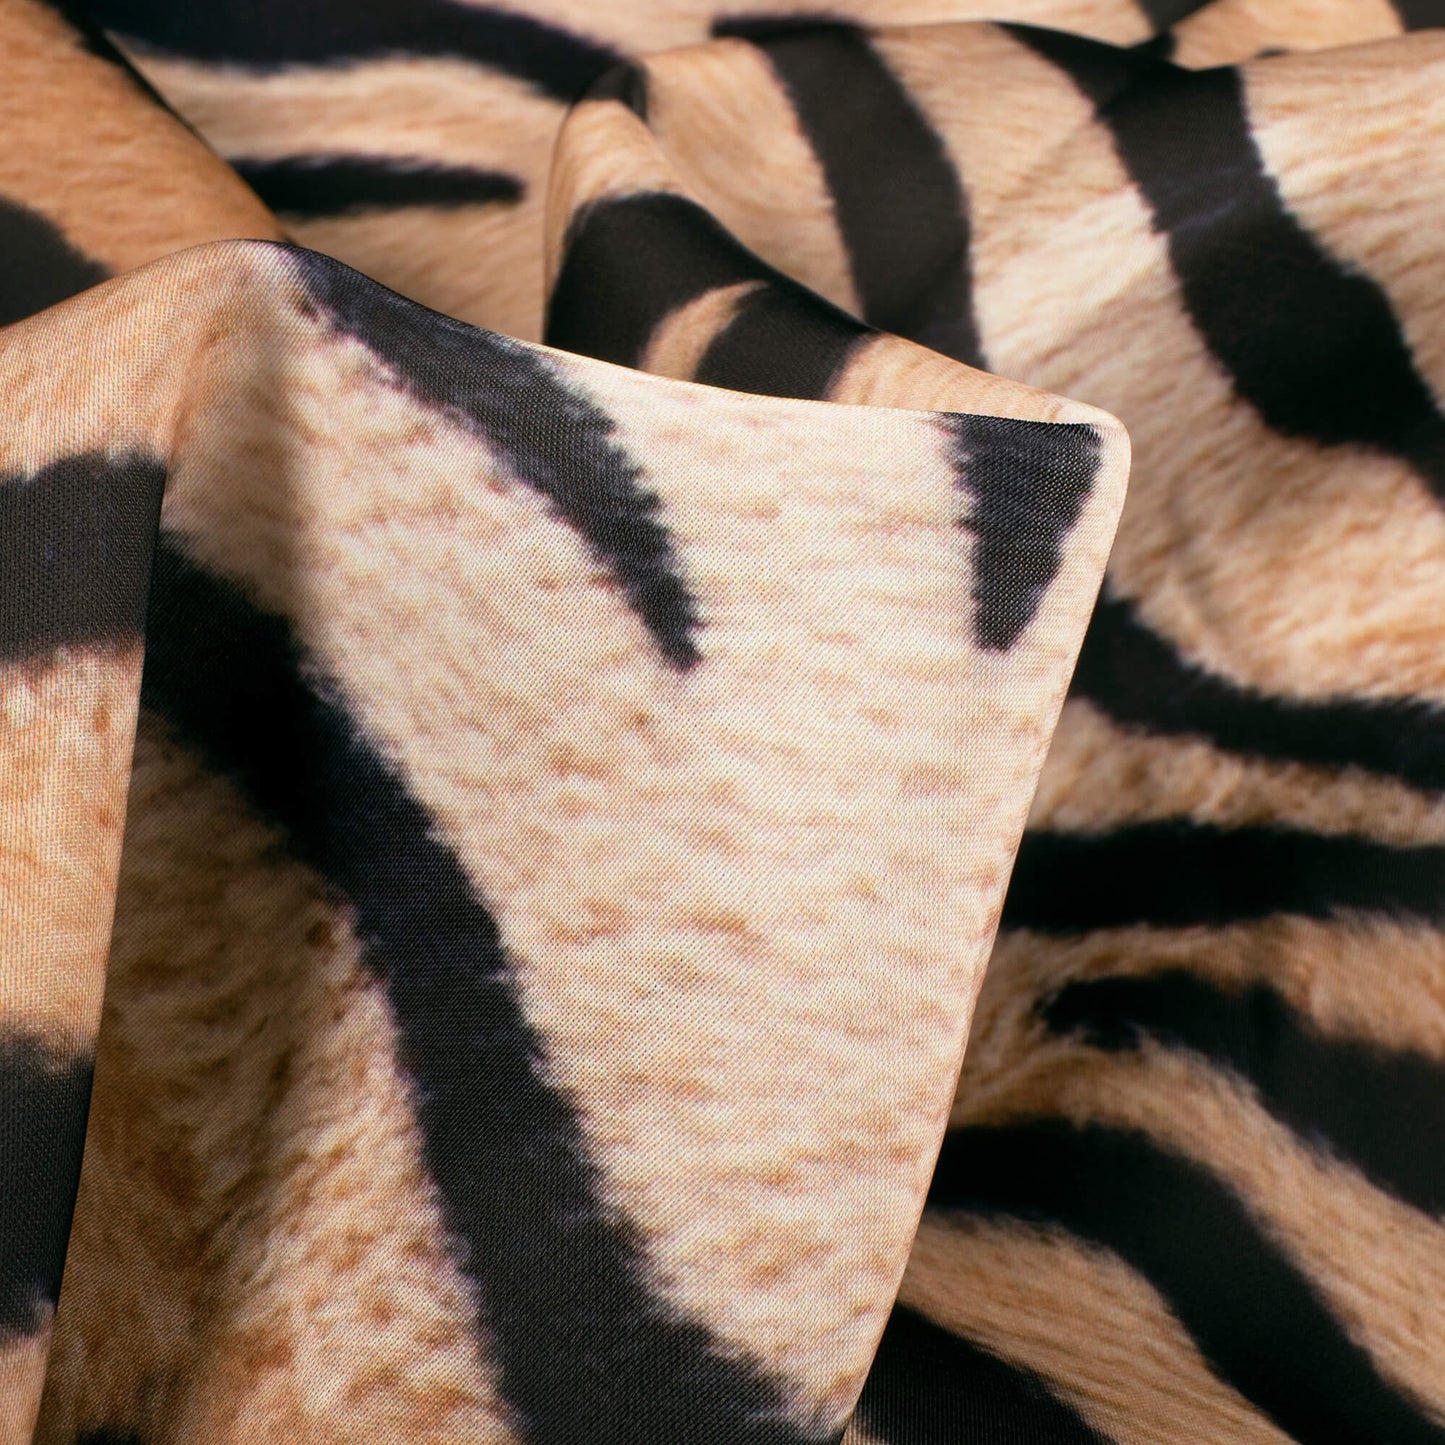 Bestselling Leopard Digital Print Imported Satin Fabric